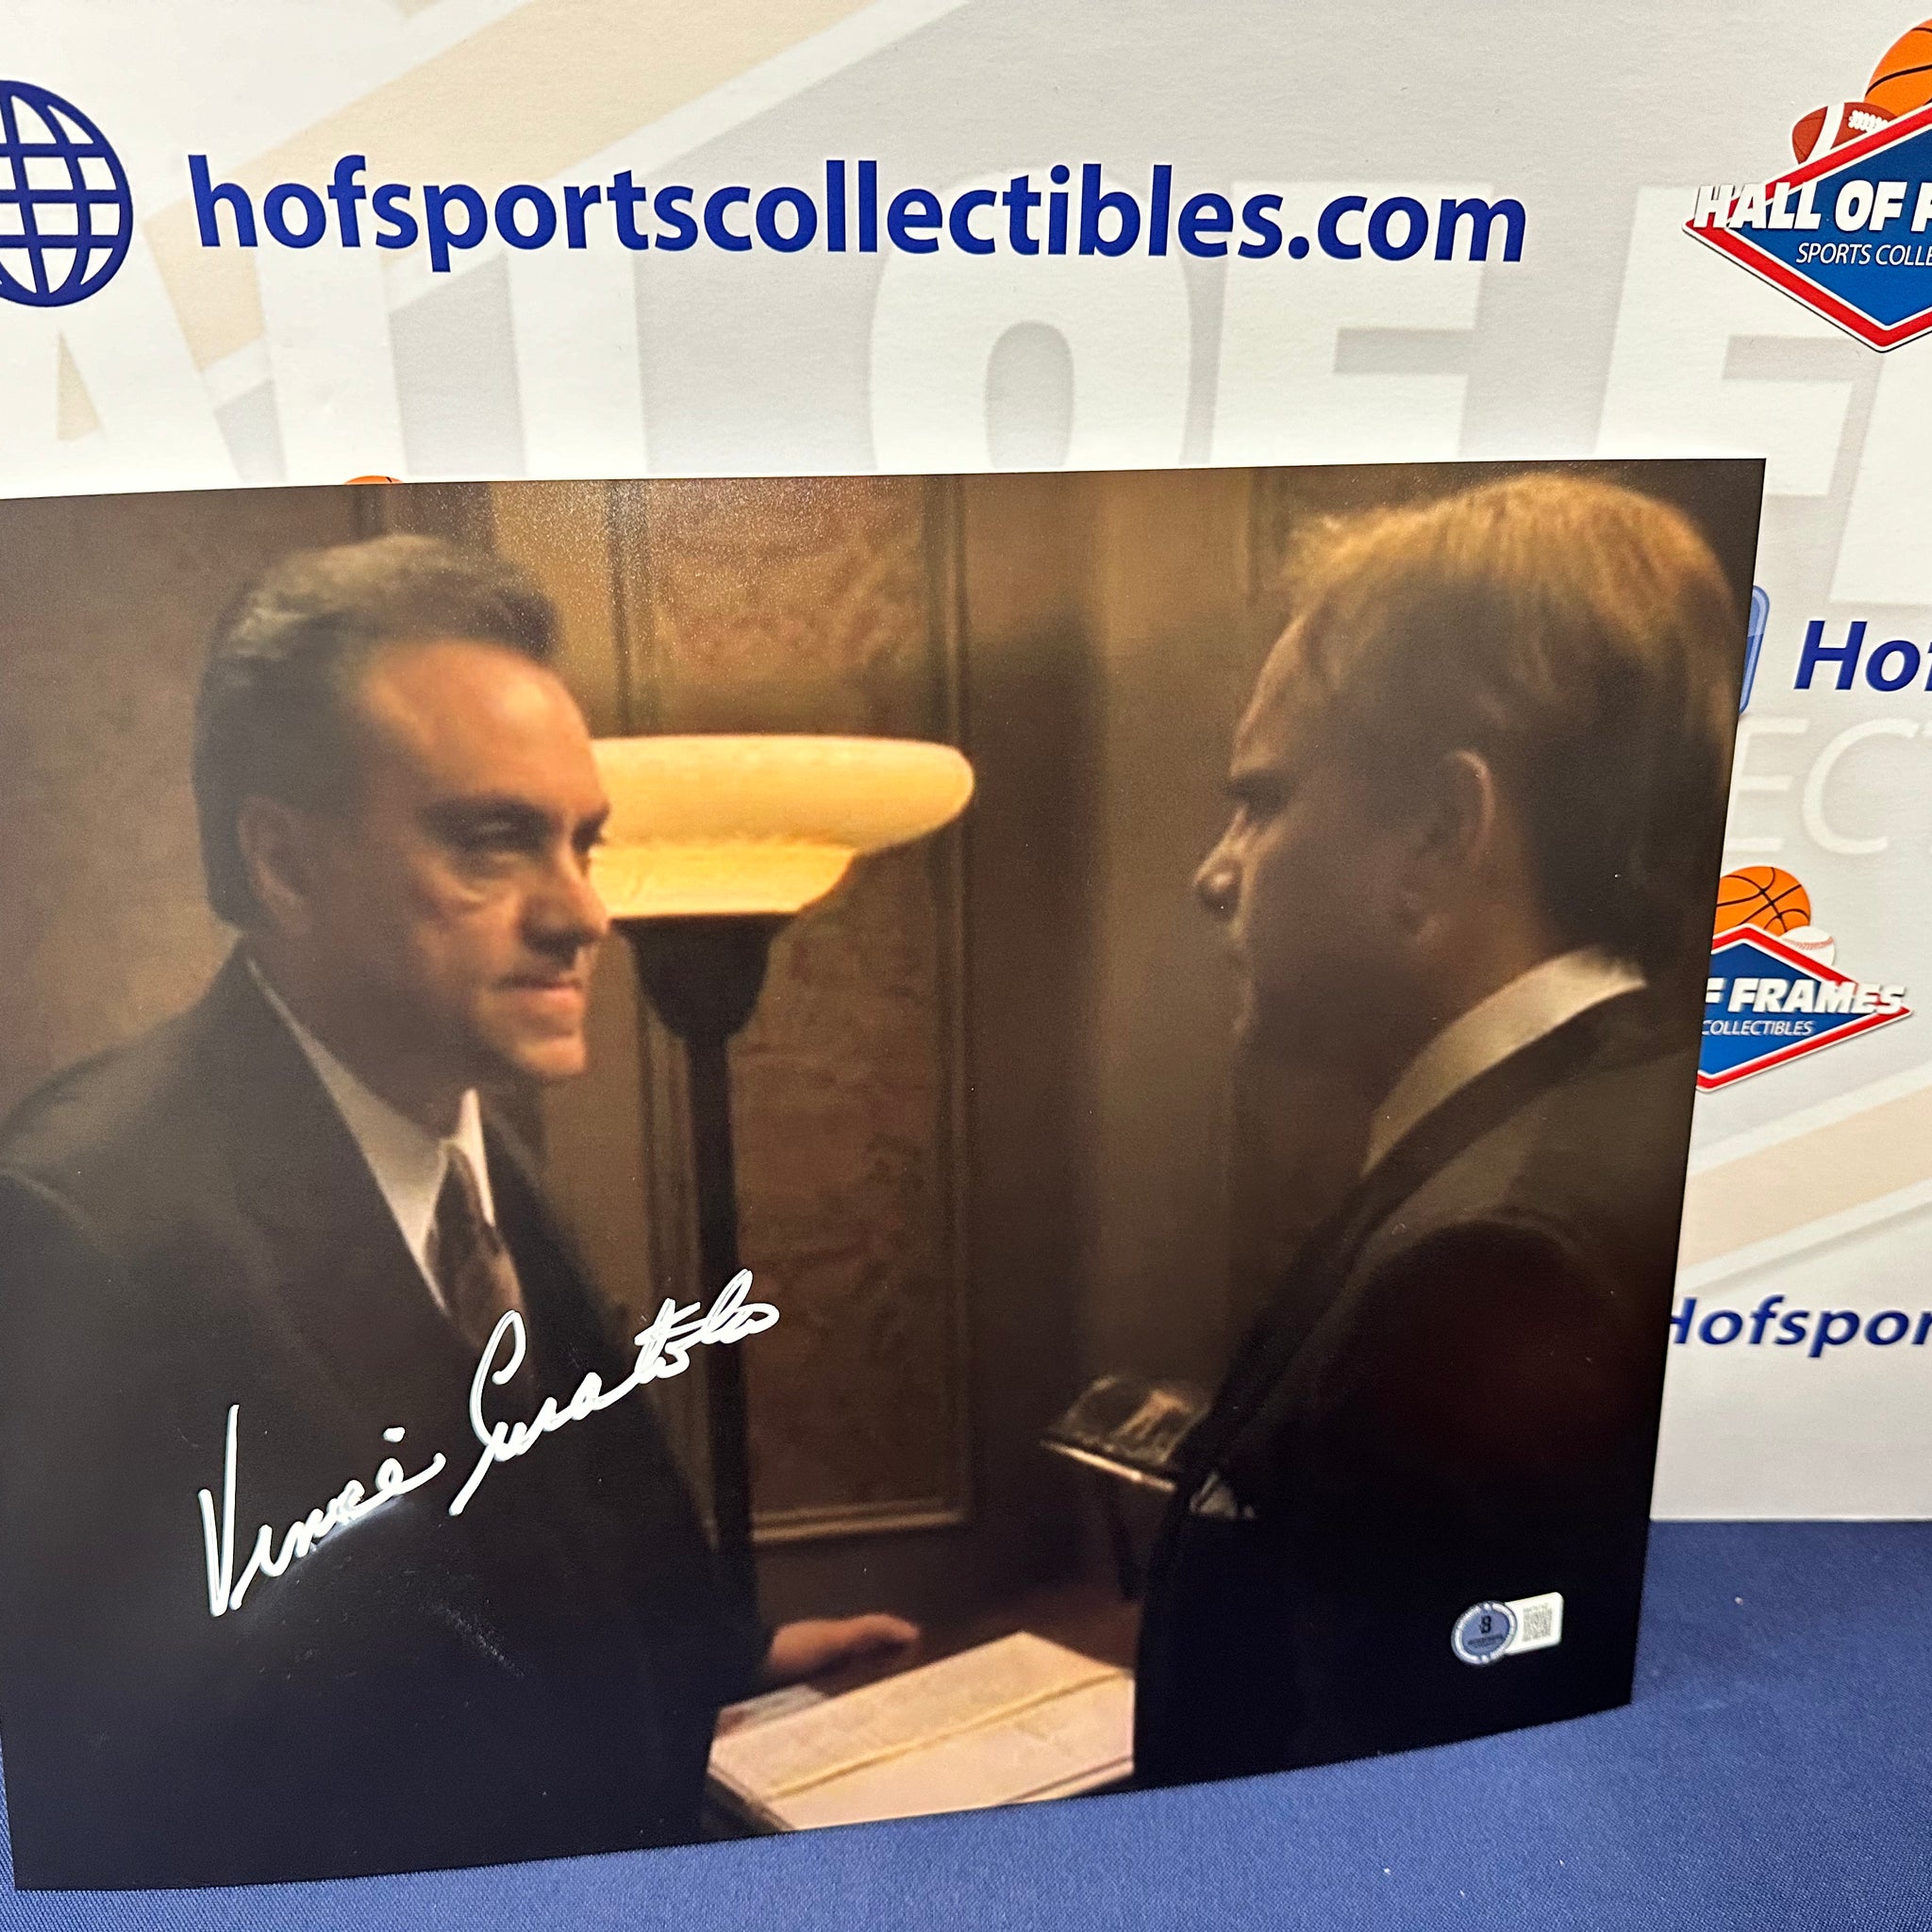 VINCENT CURATOLA "THE SOPRANOS" "JOHNNY SACK" SIGNED 11X14! BAS AUTHENTIC!